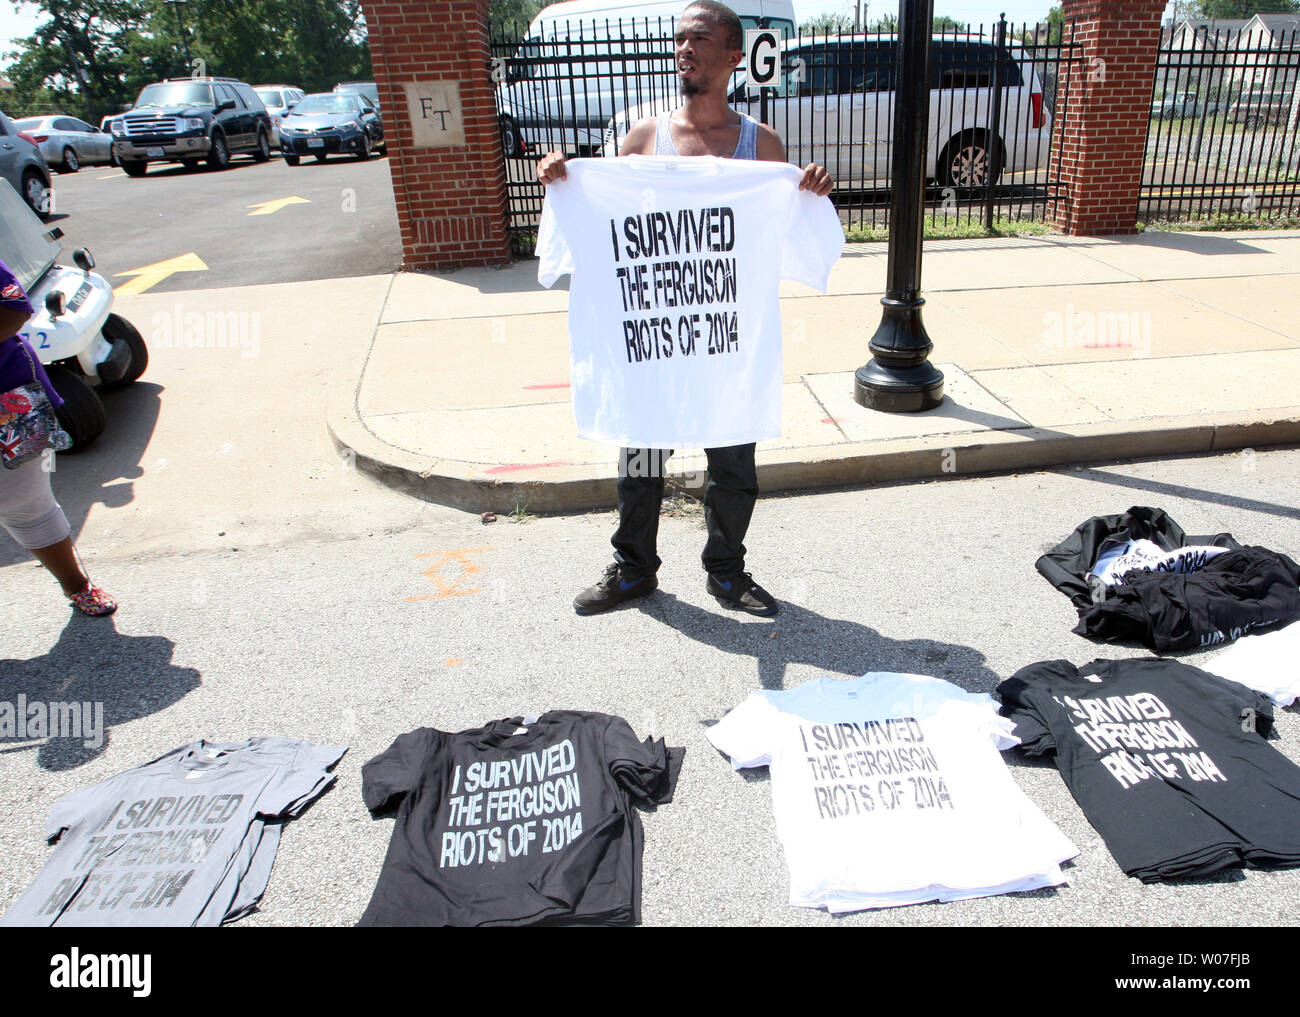 A salesman sells "I survived the Ferguson riots of 2014"  tee shirts outside of the Friendly Temple Missionary Baptist Church during the funeral of Michael Brown Jr. in St. Louis on August 25, 2014. Brown gained attention after was shot by a white Ferguson, Missouri police officer on August 9 and was unarmed. The shooting led to several nights of looting, arrests and heavy police presence.   UPI/Bill Greenblatt Stock Photo